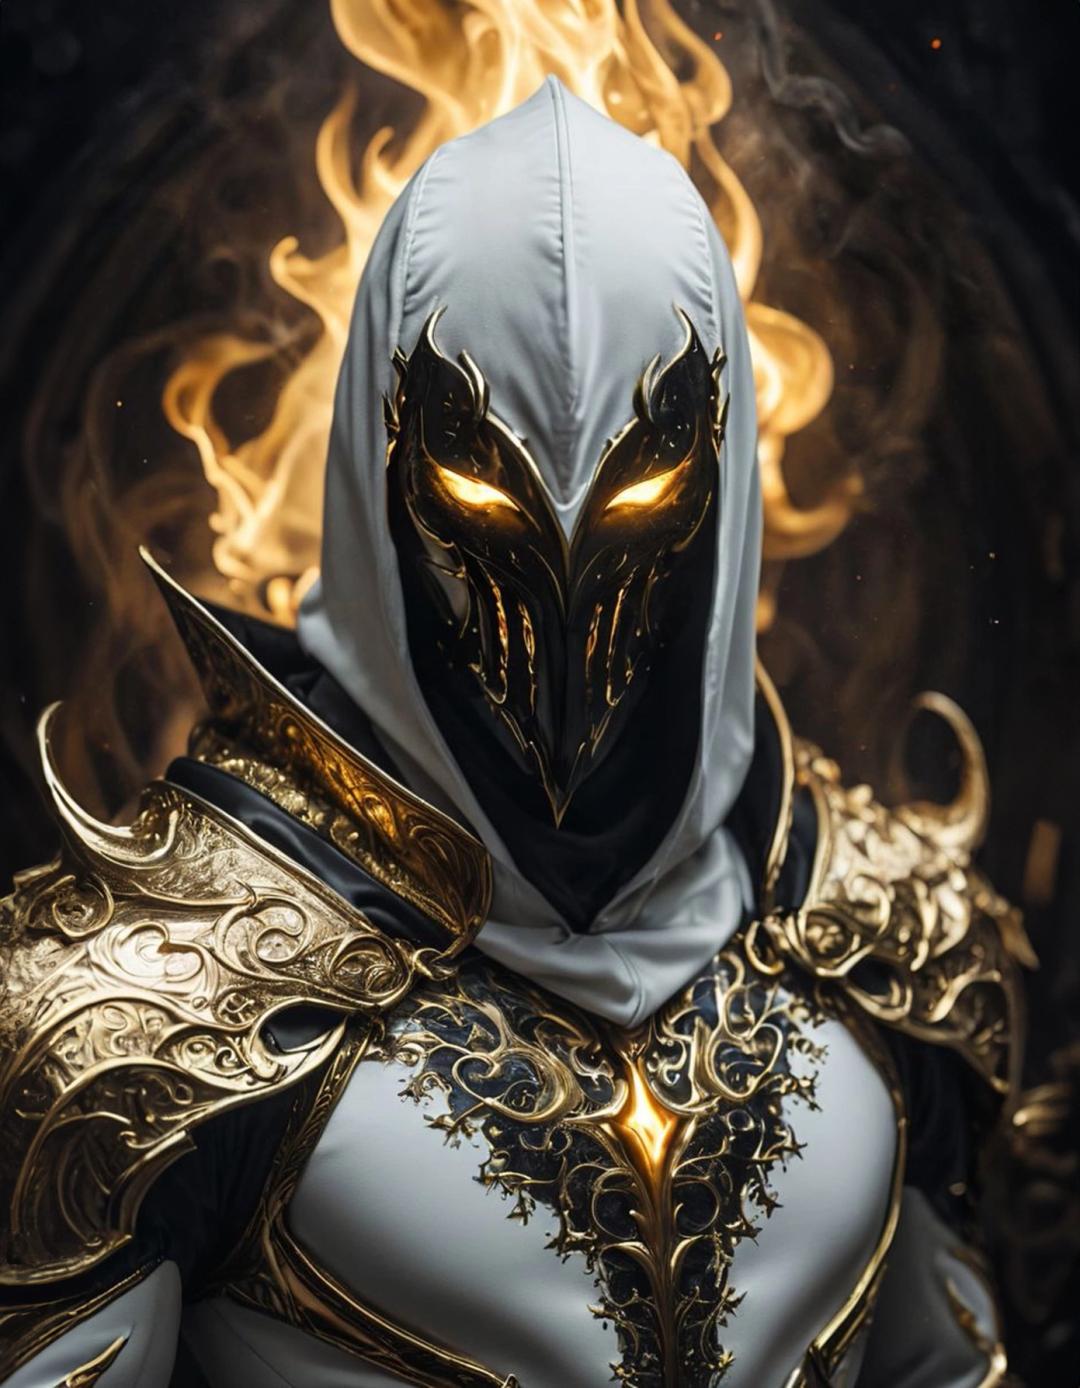 white and gold outfit with a hood flames behind